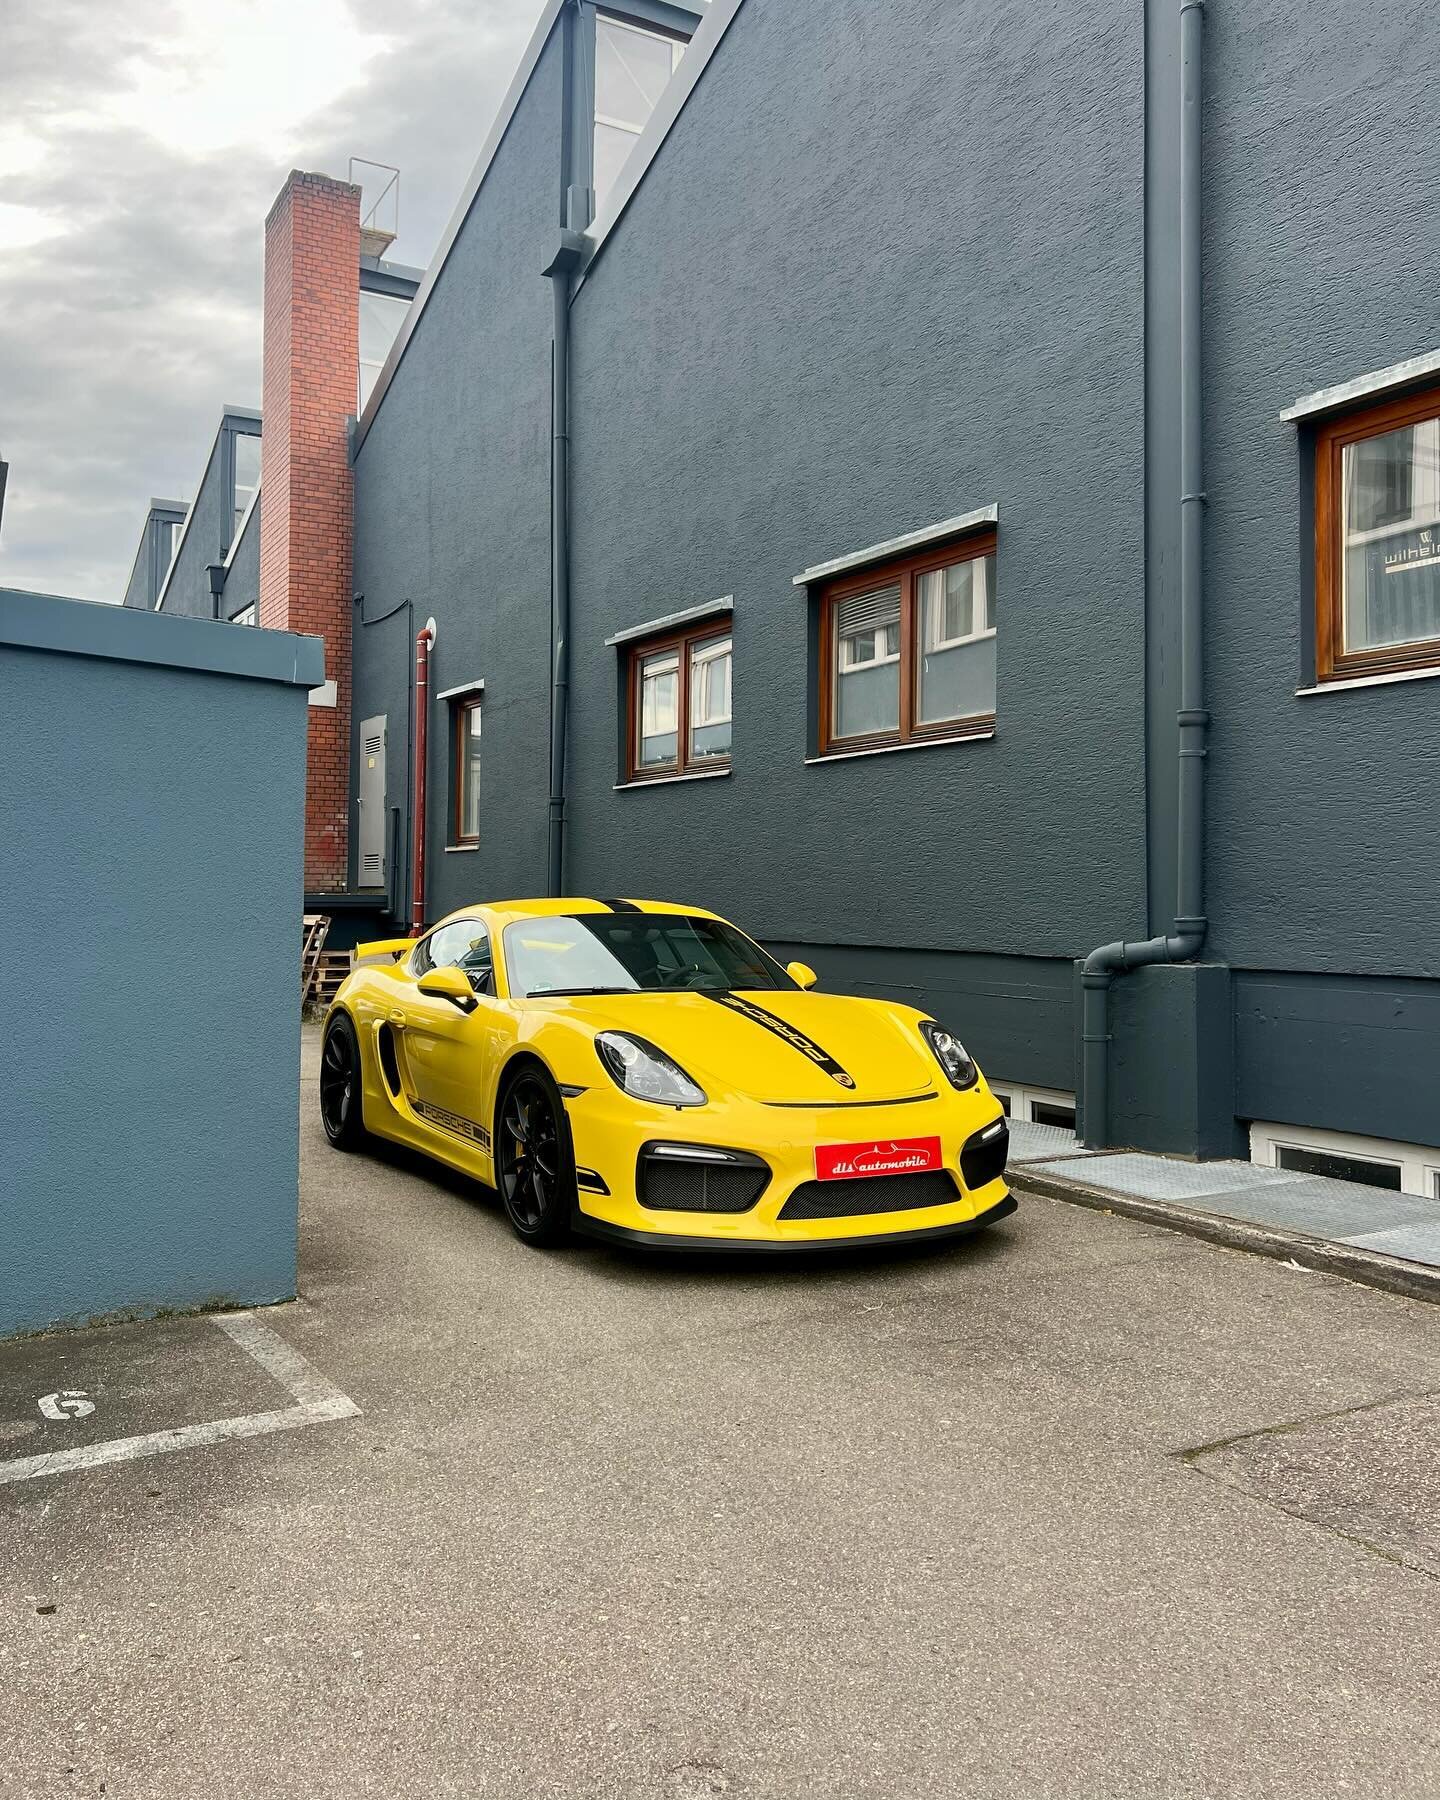 Some initial information about our new arrival:⠀
⠀
Porsche 981 Cayman GT4, first registered in 06.2016, one previous owner, racing yellow | black, 14.220km, PCCB, no race track, no accidents, fully equipped with various exclusive options...⠀
⠀
More o